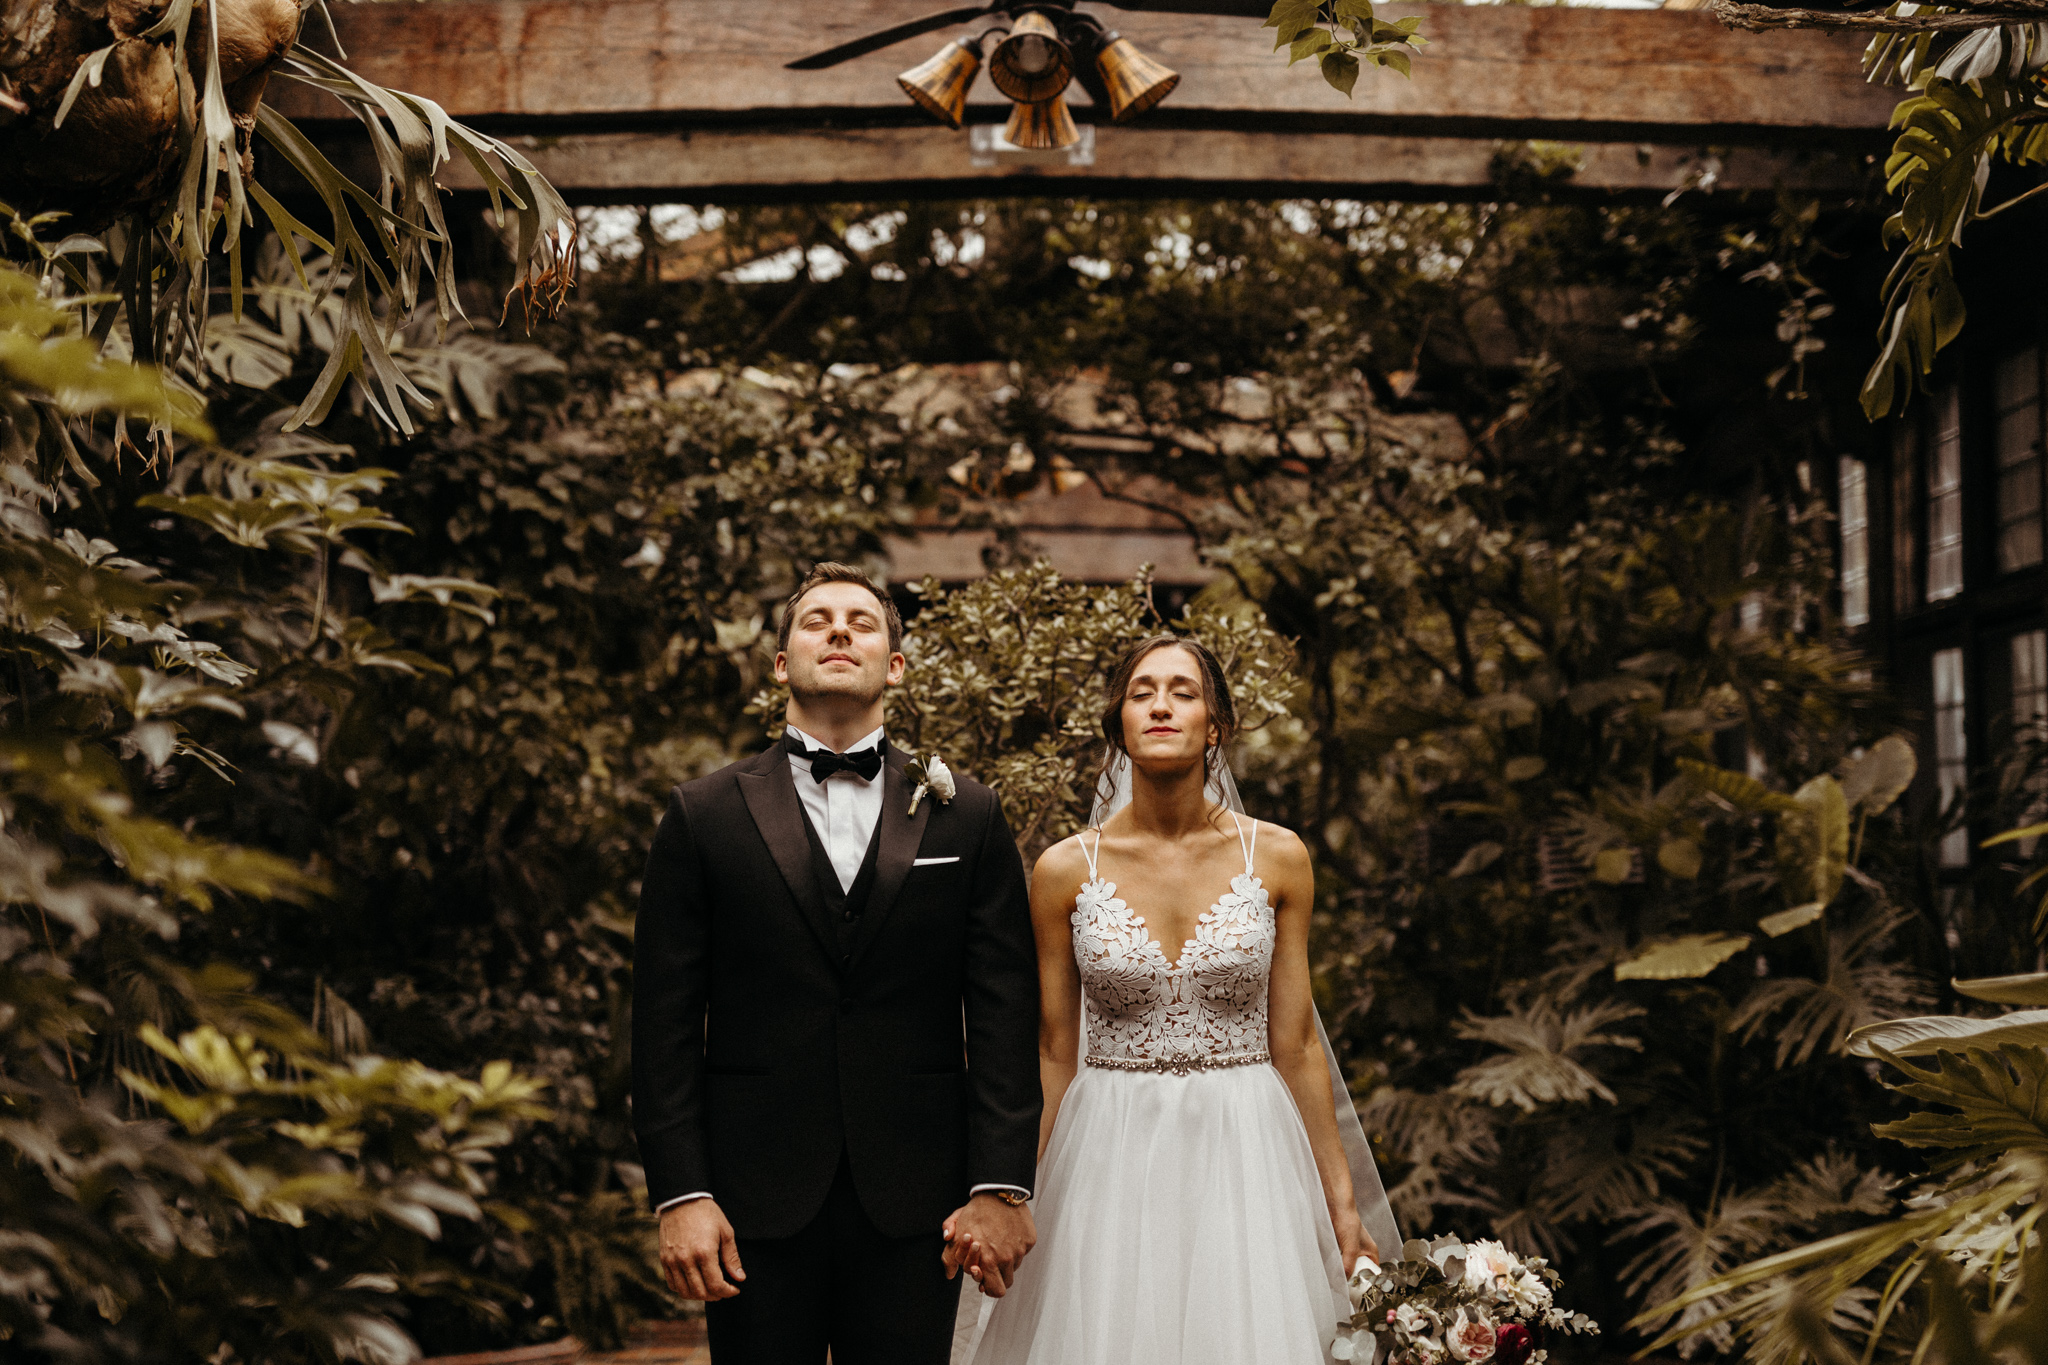 Greenhouse Wedding Day Vibes At The Pleasantdale Chateau // West Orange, NJ // Victoria Selman Photographer